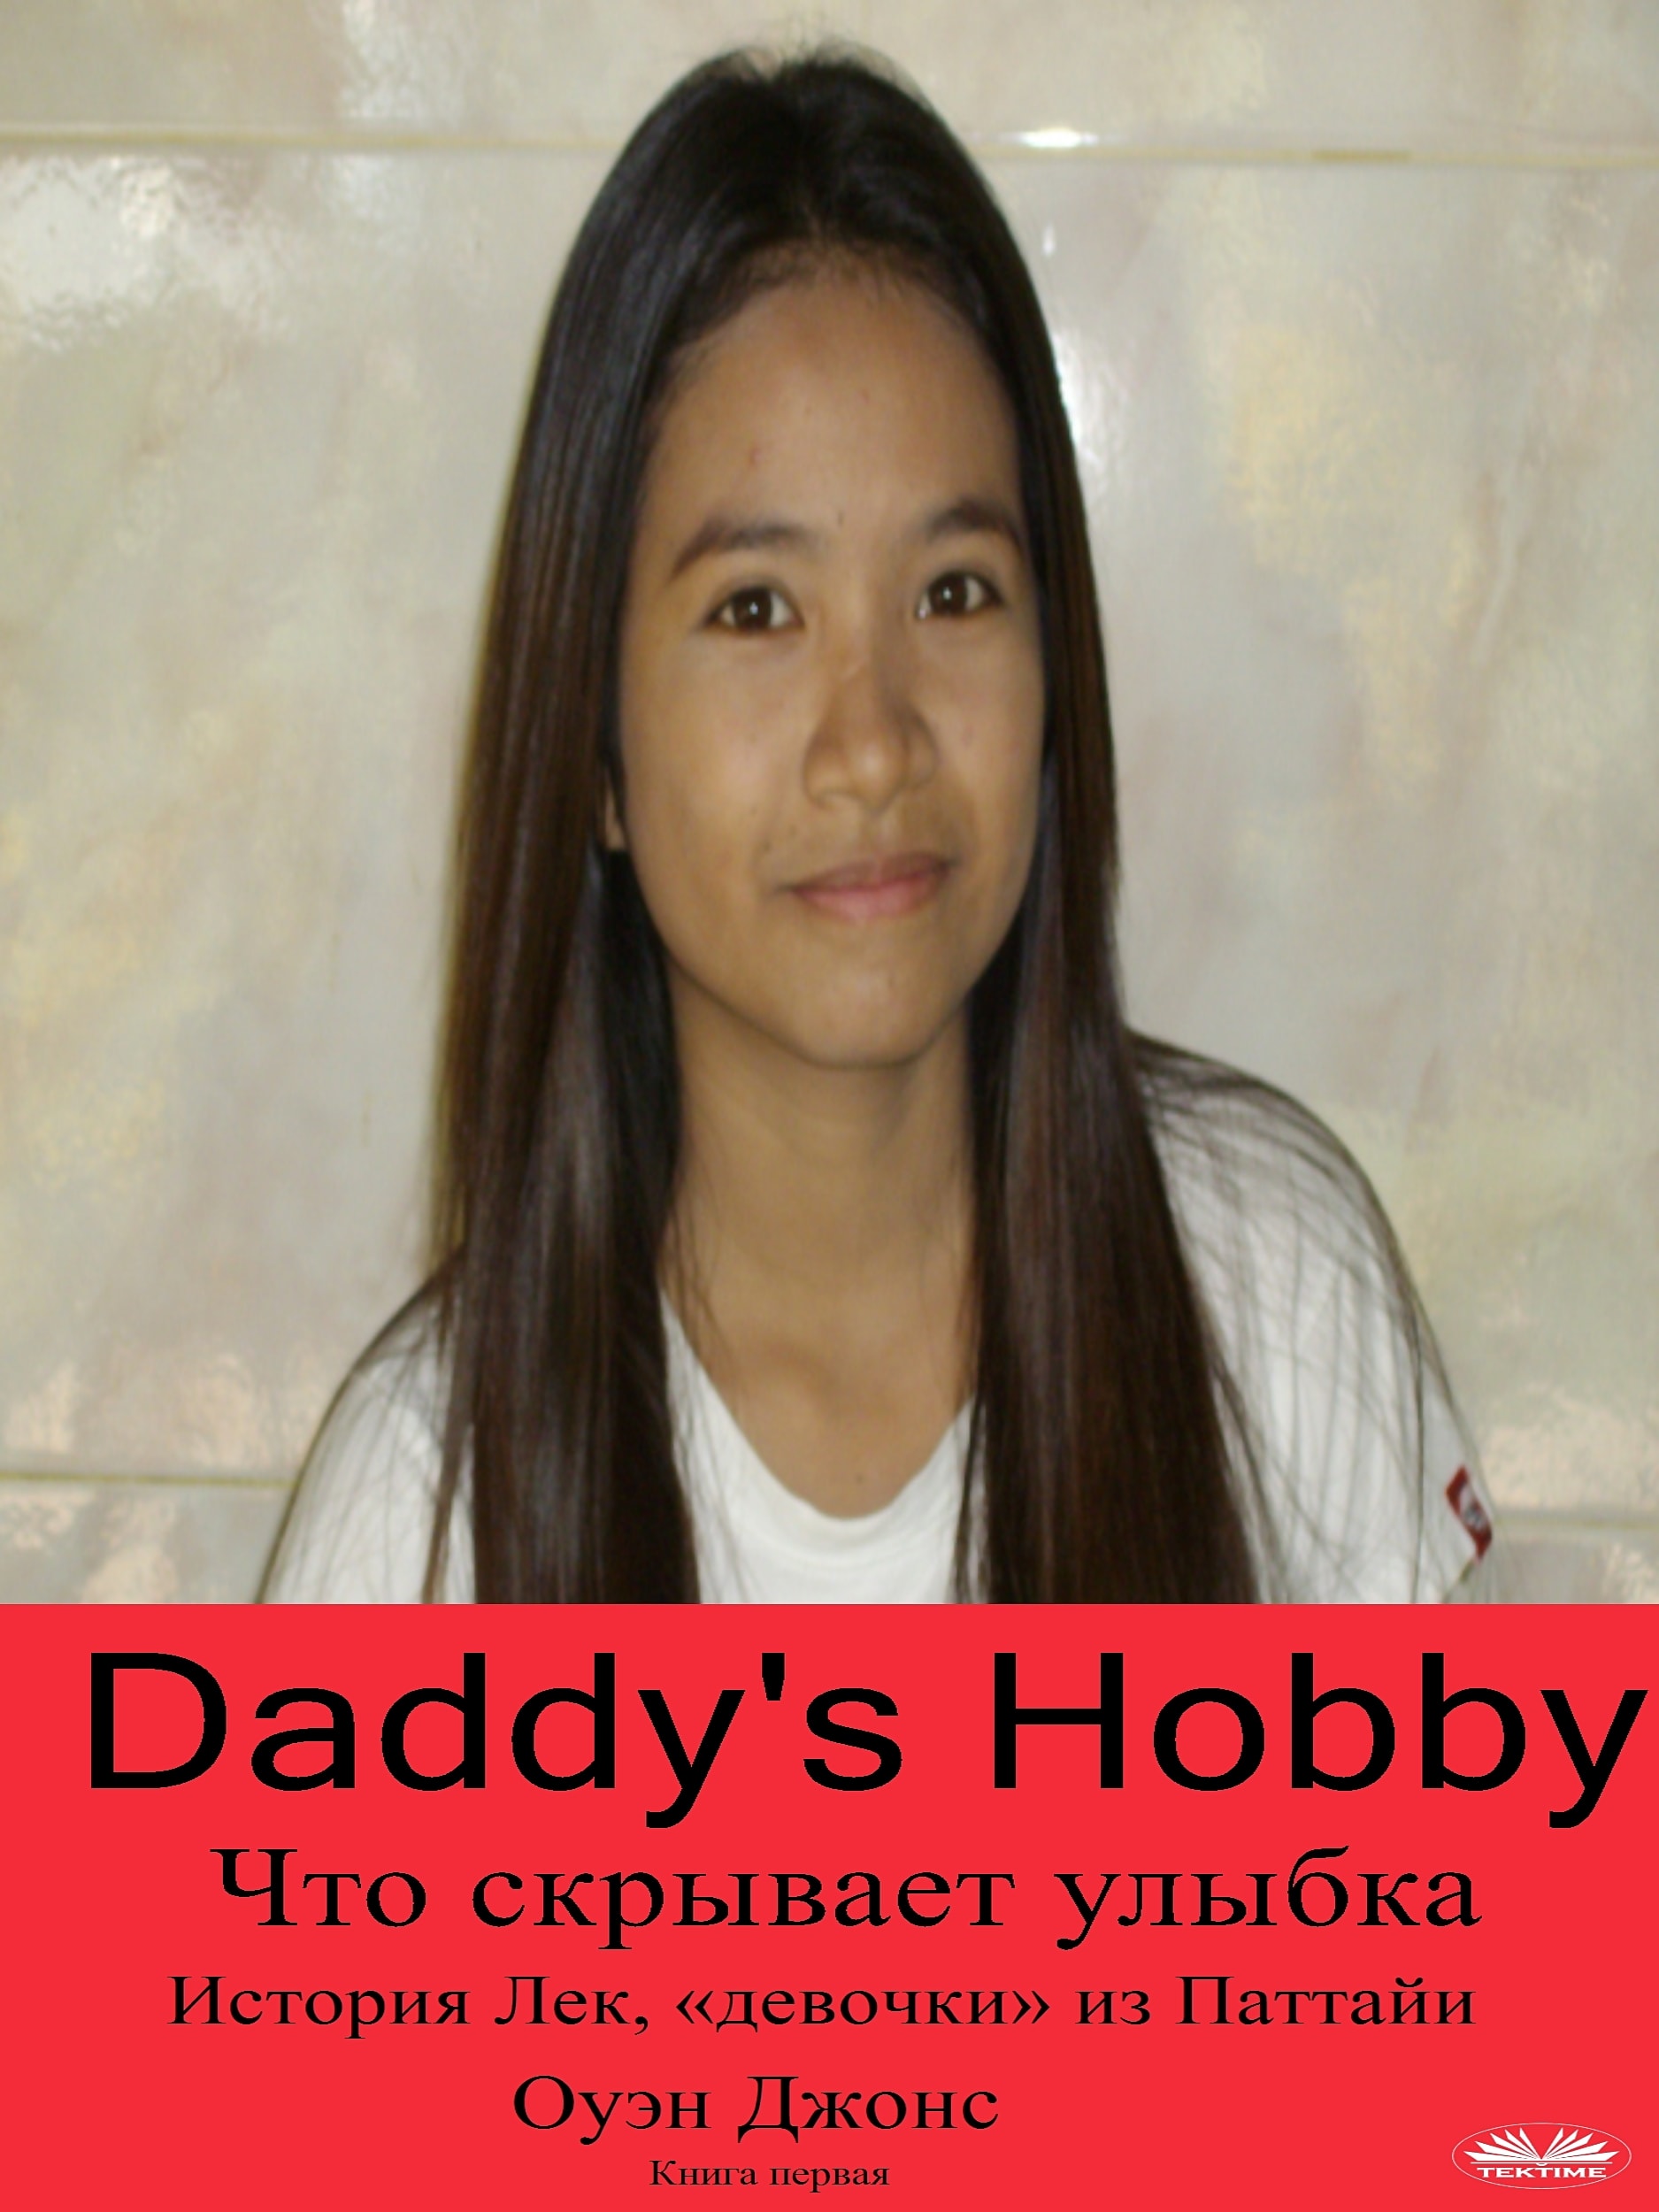 ”Daddy's Hobby”